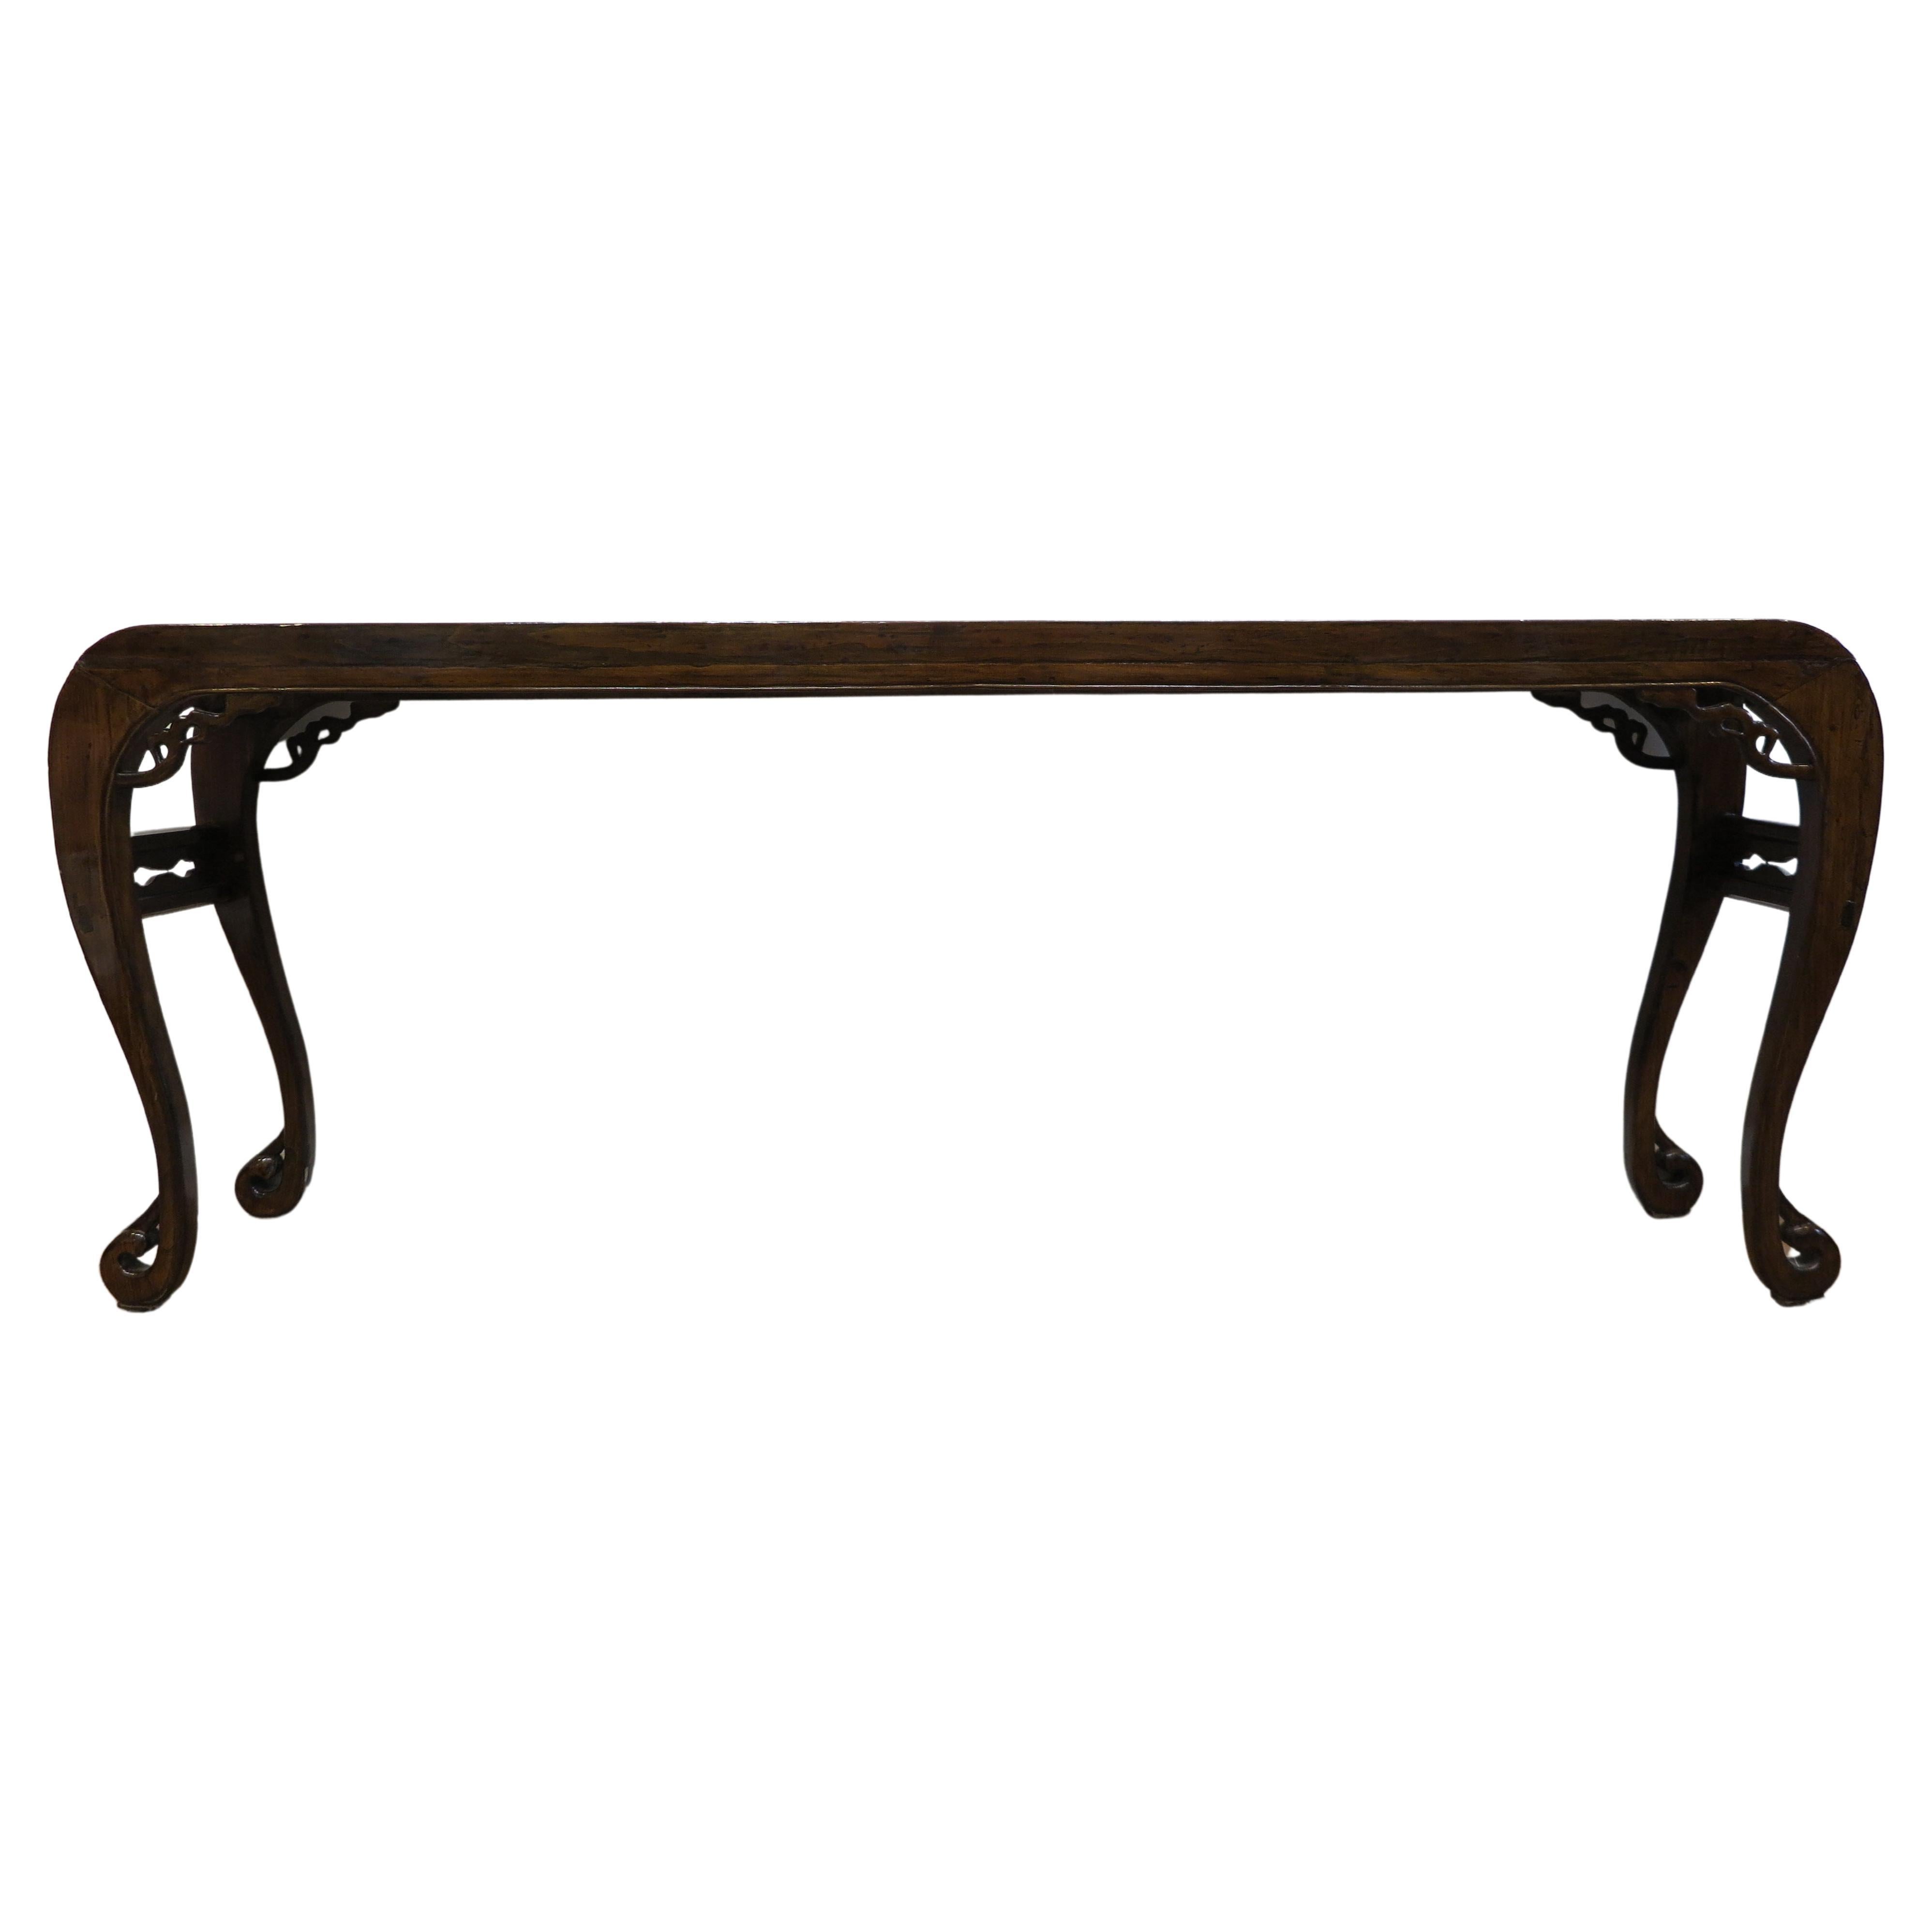 19th Century Waterfall Edge Console Table